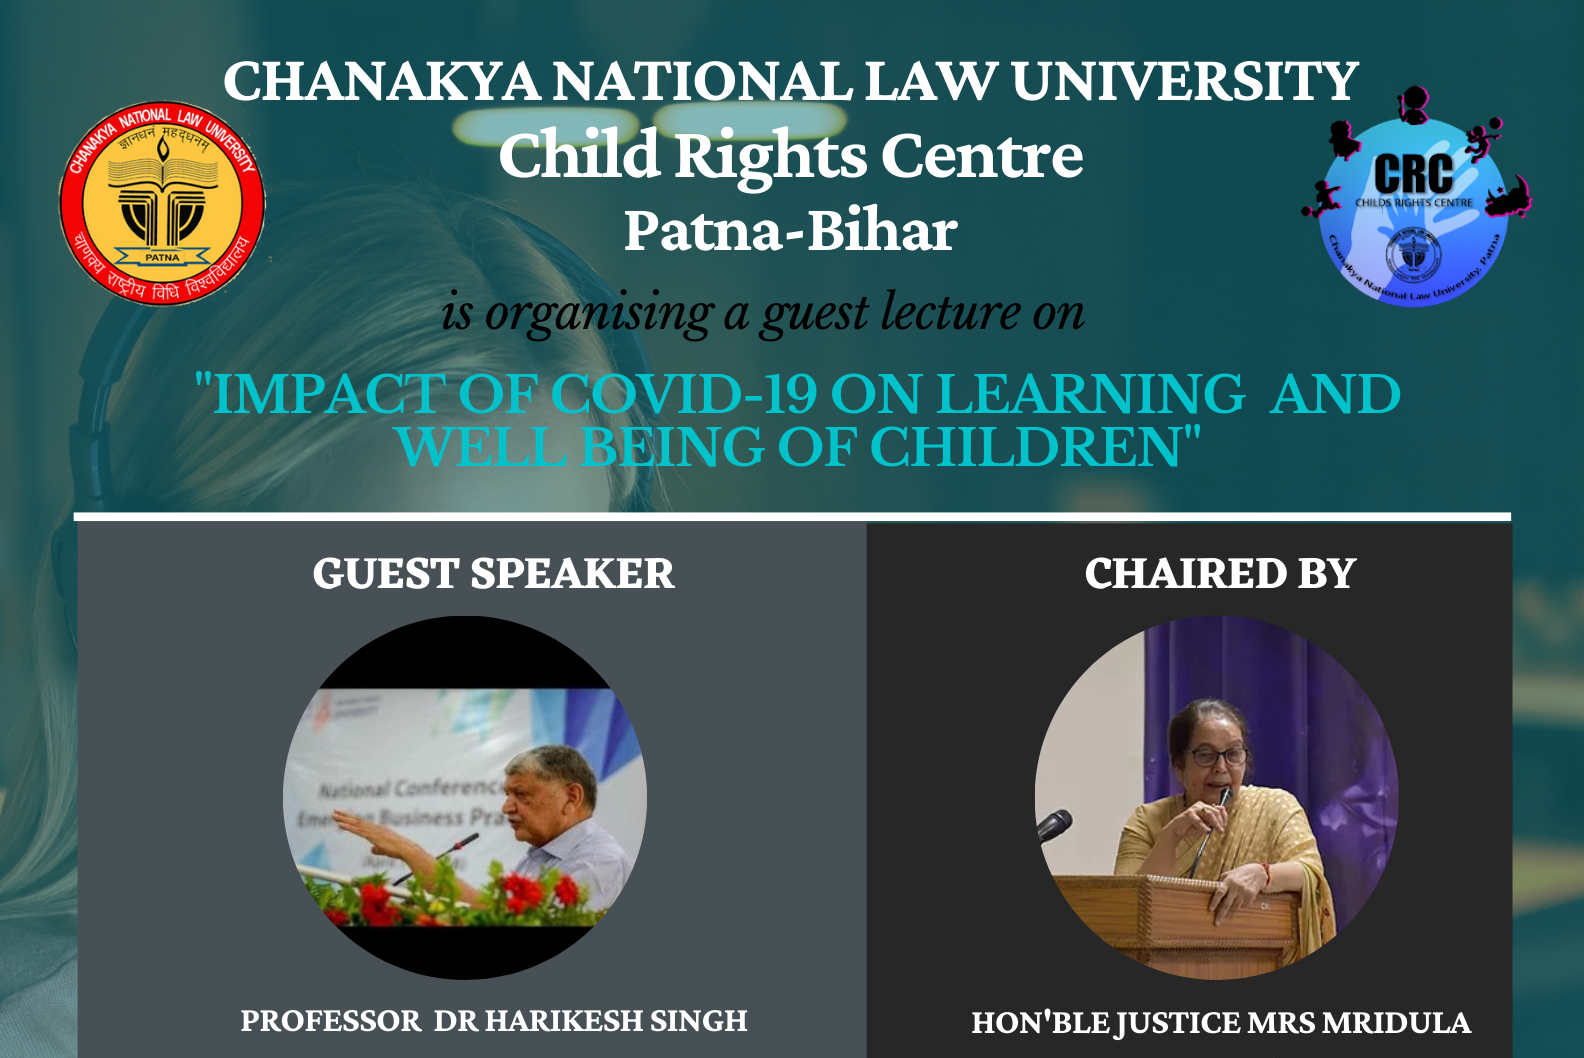 CNLU Patna Guest Lecture on “Impact of COVID-19 on Learning And Well-Being of Children” By Child Rights Centre, CNLU Patna: 20th July, 2021